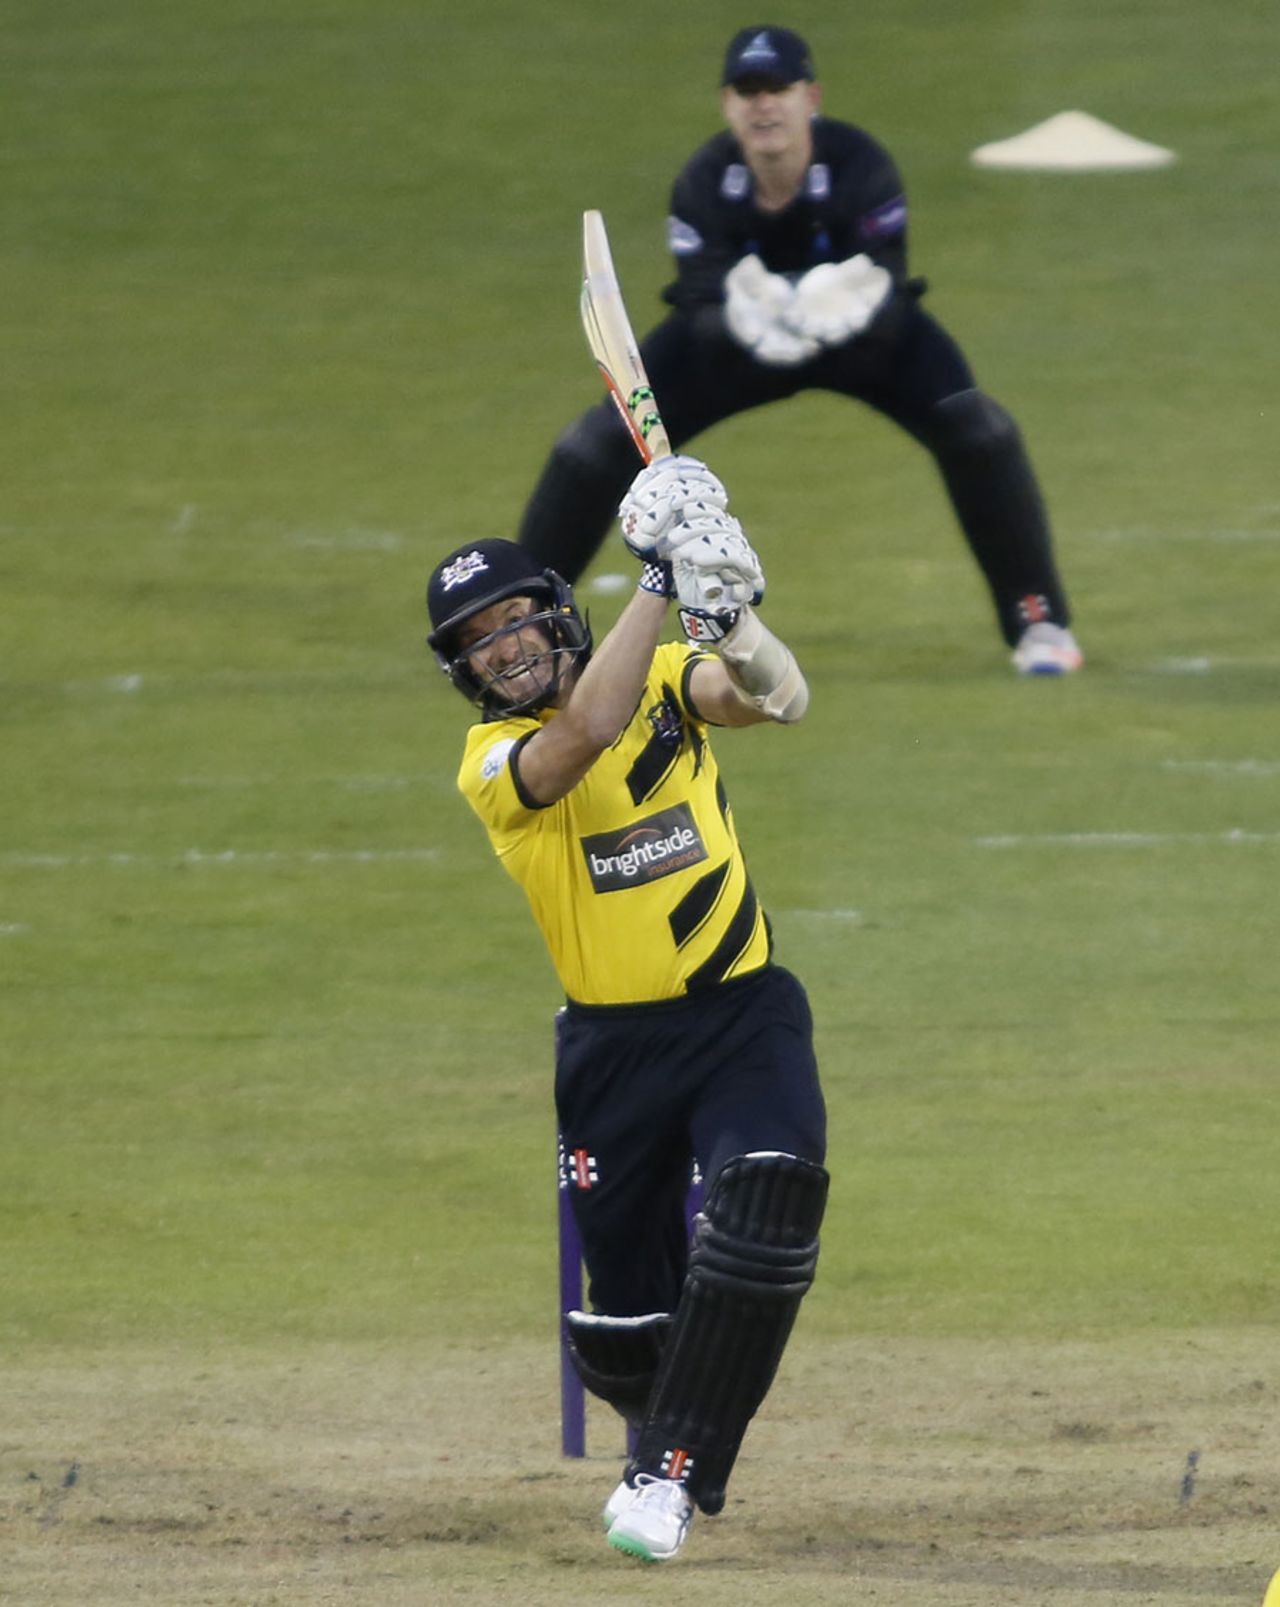 Michael Klinger couldn't quite get Gloucestershire ahead of the D/L score, Gloucestershire v Sussex, NatWest T20 Blast, South Group, Bristol, May 20, 2016